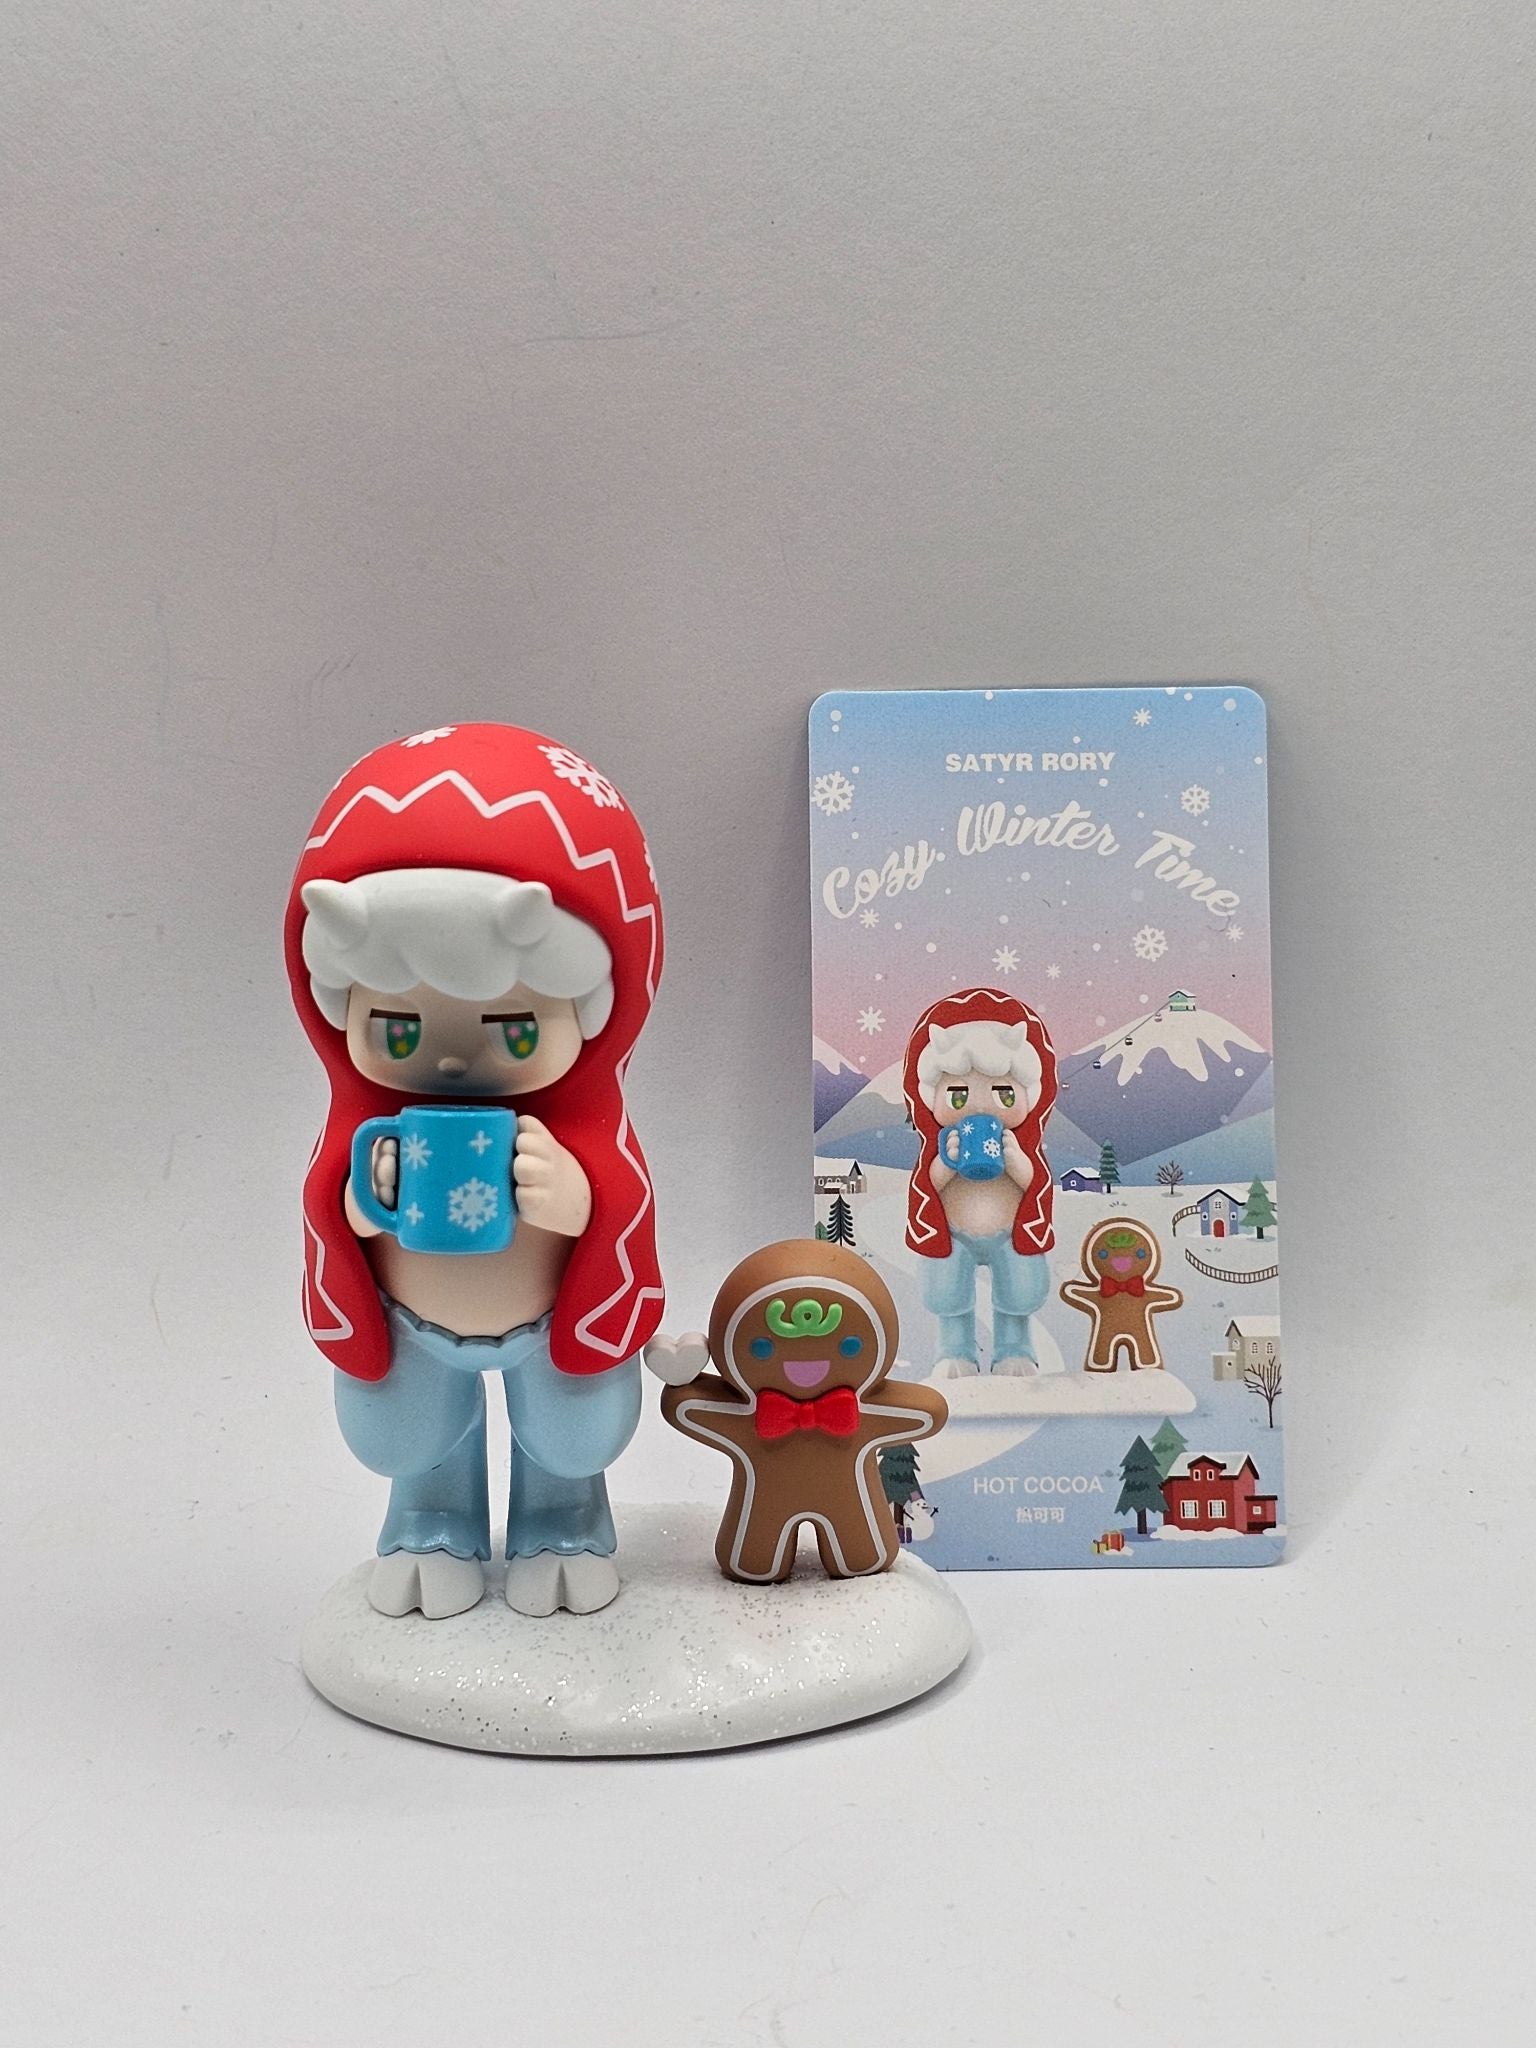 Hot Cocoa - Satyr Rory Cozy Winter Time Blind Box Series - Popmart - 1